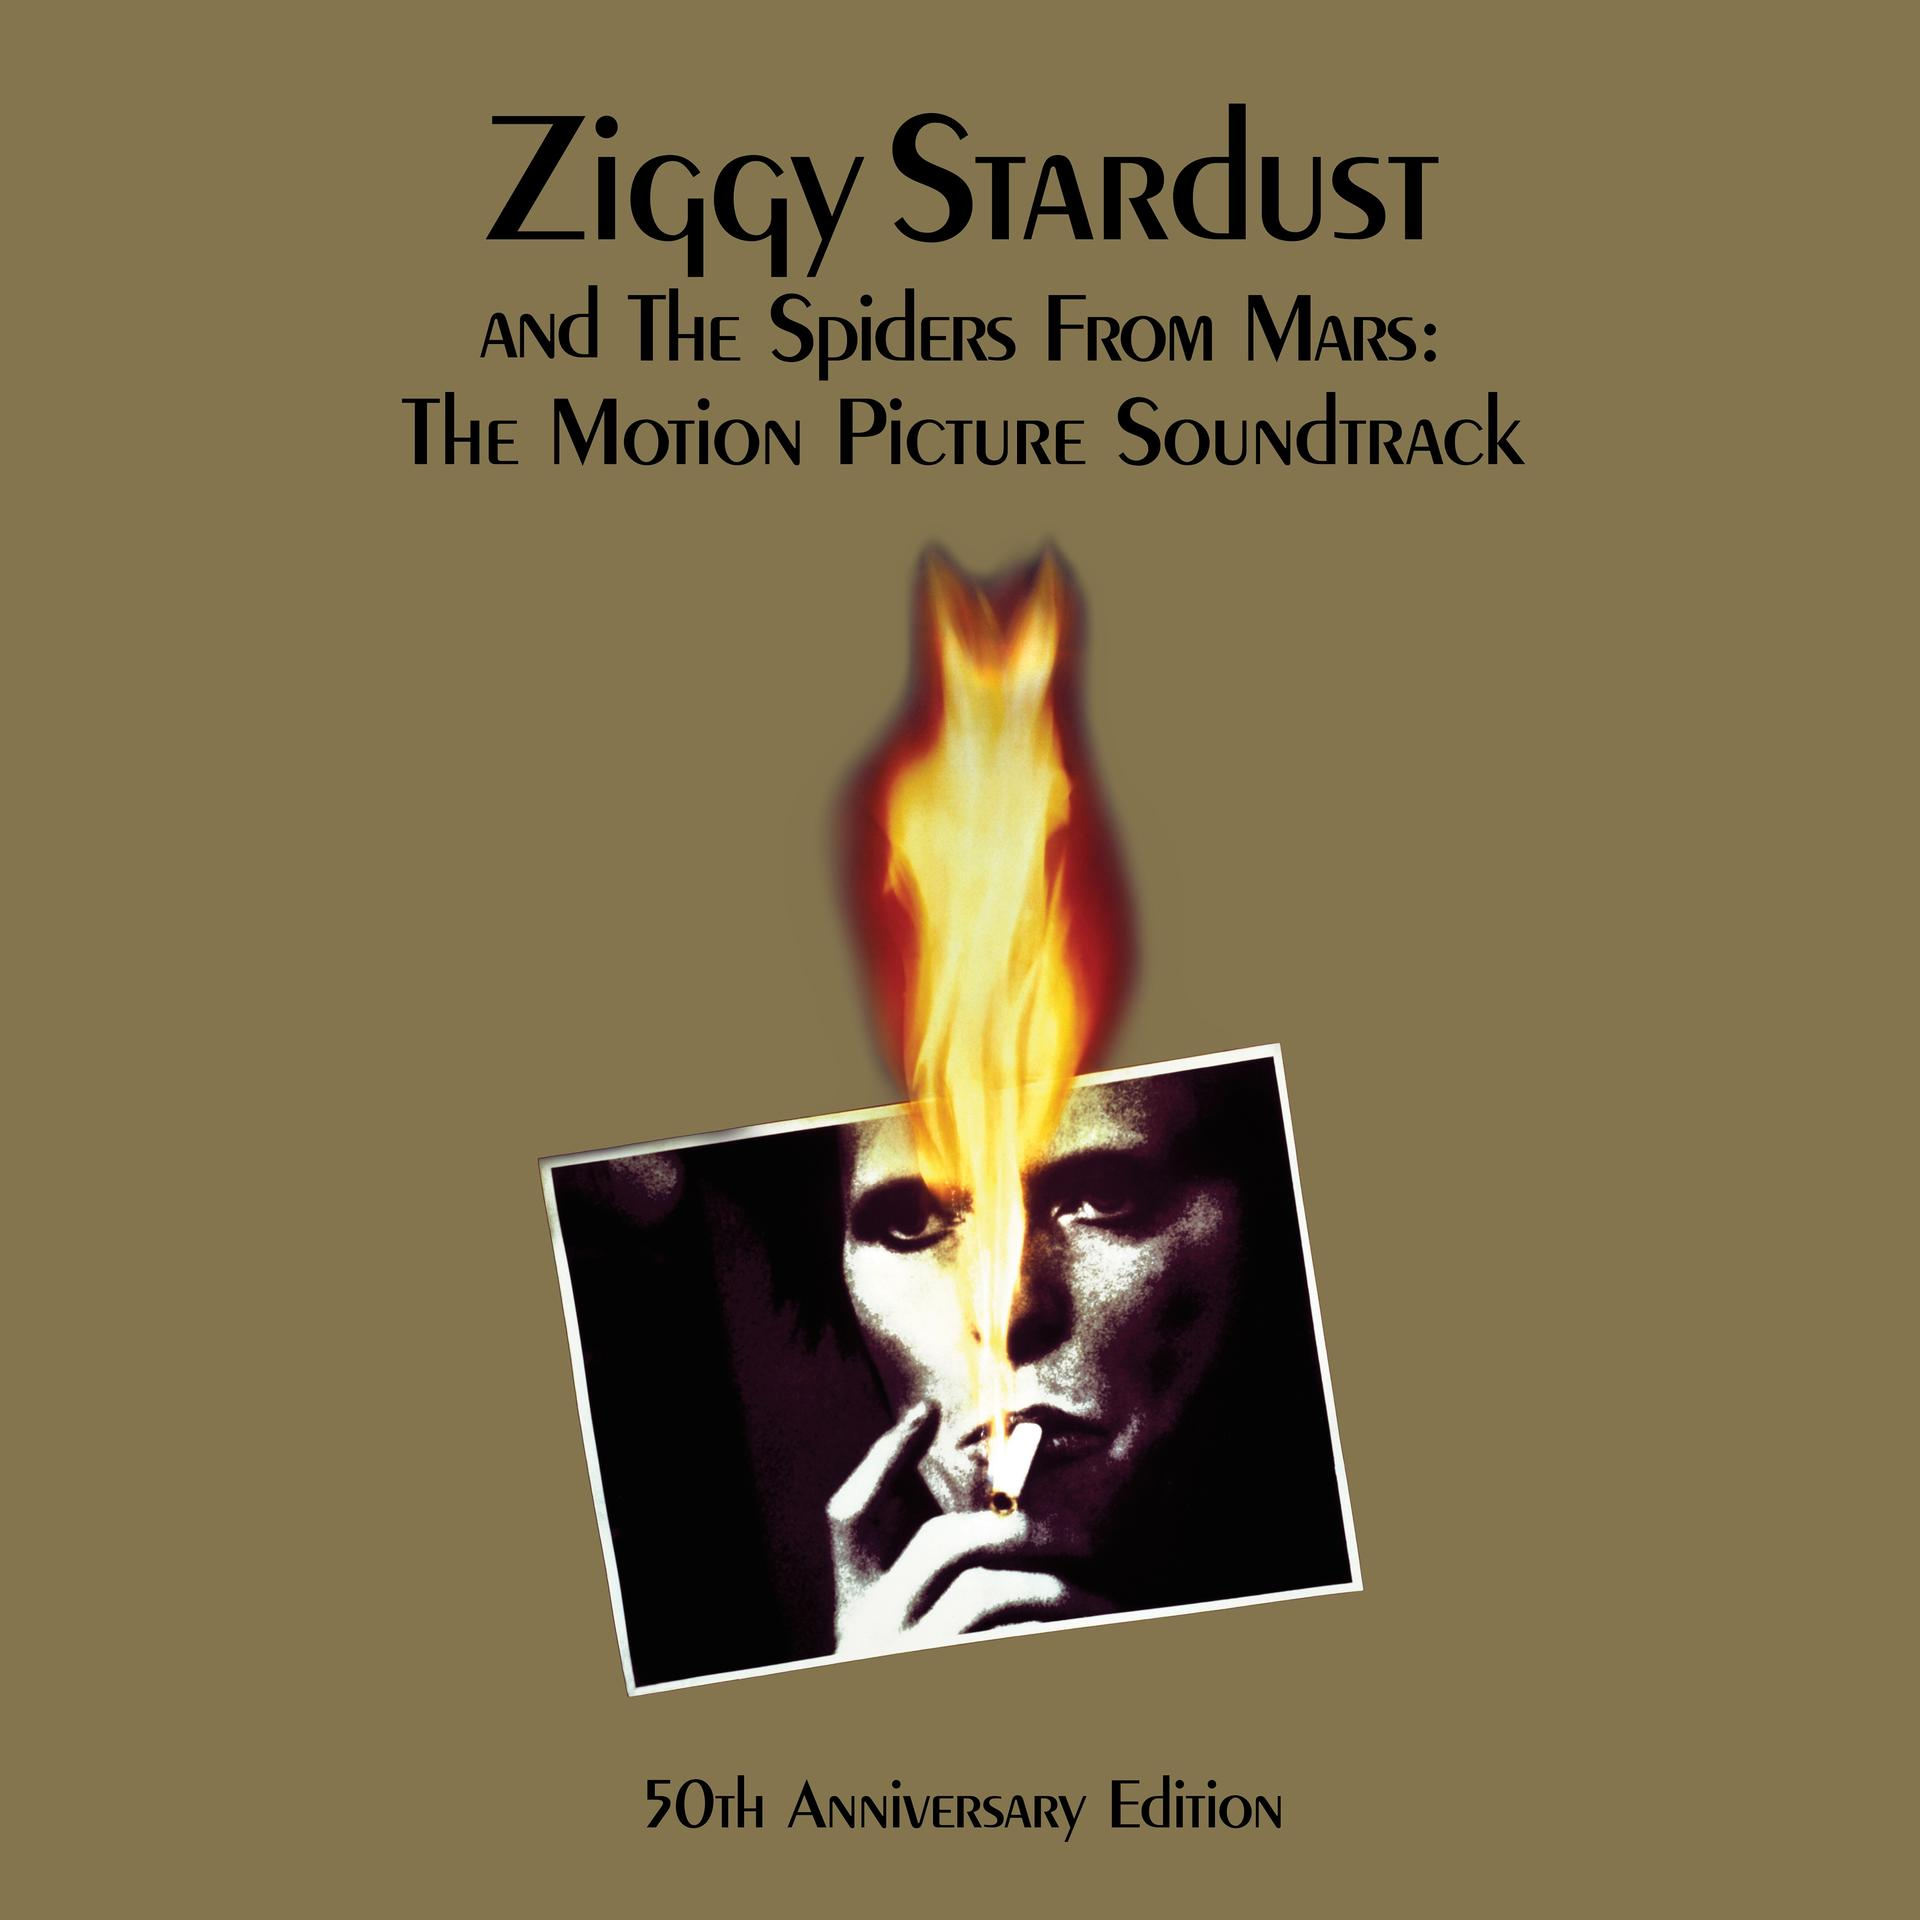 David Bowie From (Vinyl) Mars: - Stardust The Spiders - Ziggy and